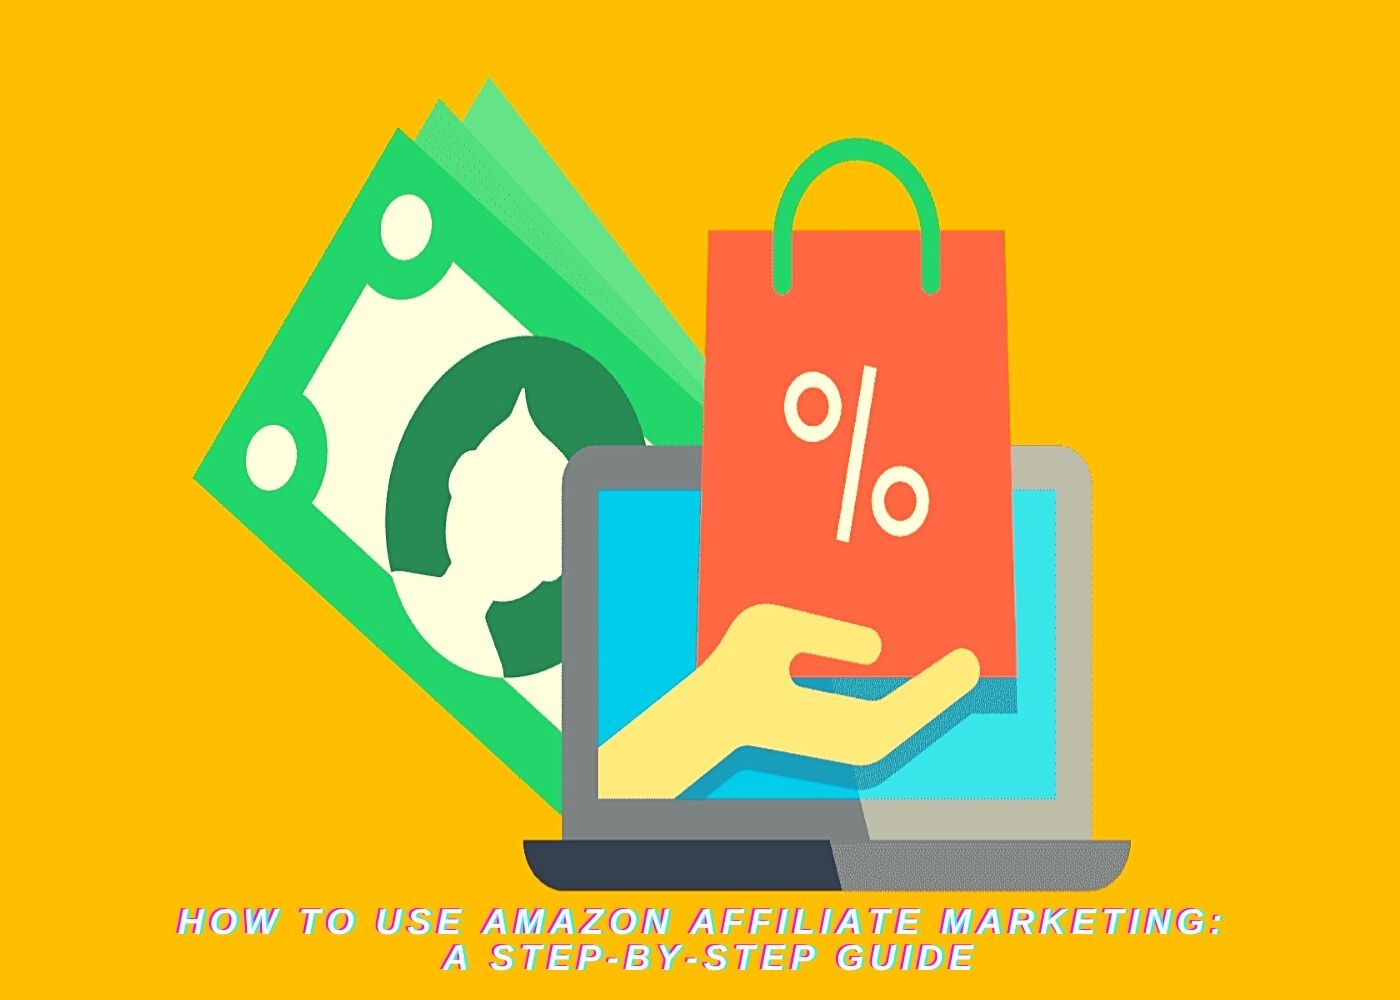 How to use Amazon Affiliate Marketing: A Step-by-Step Guide